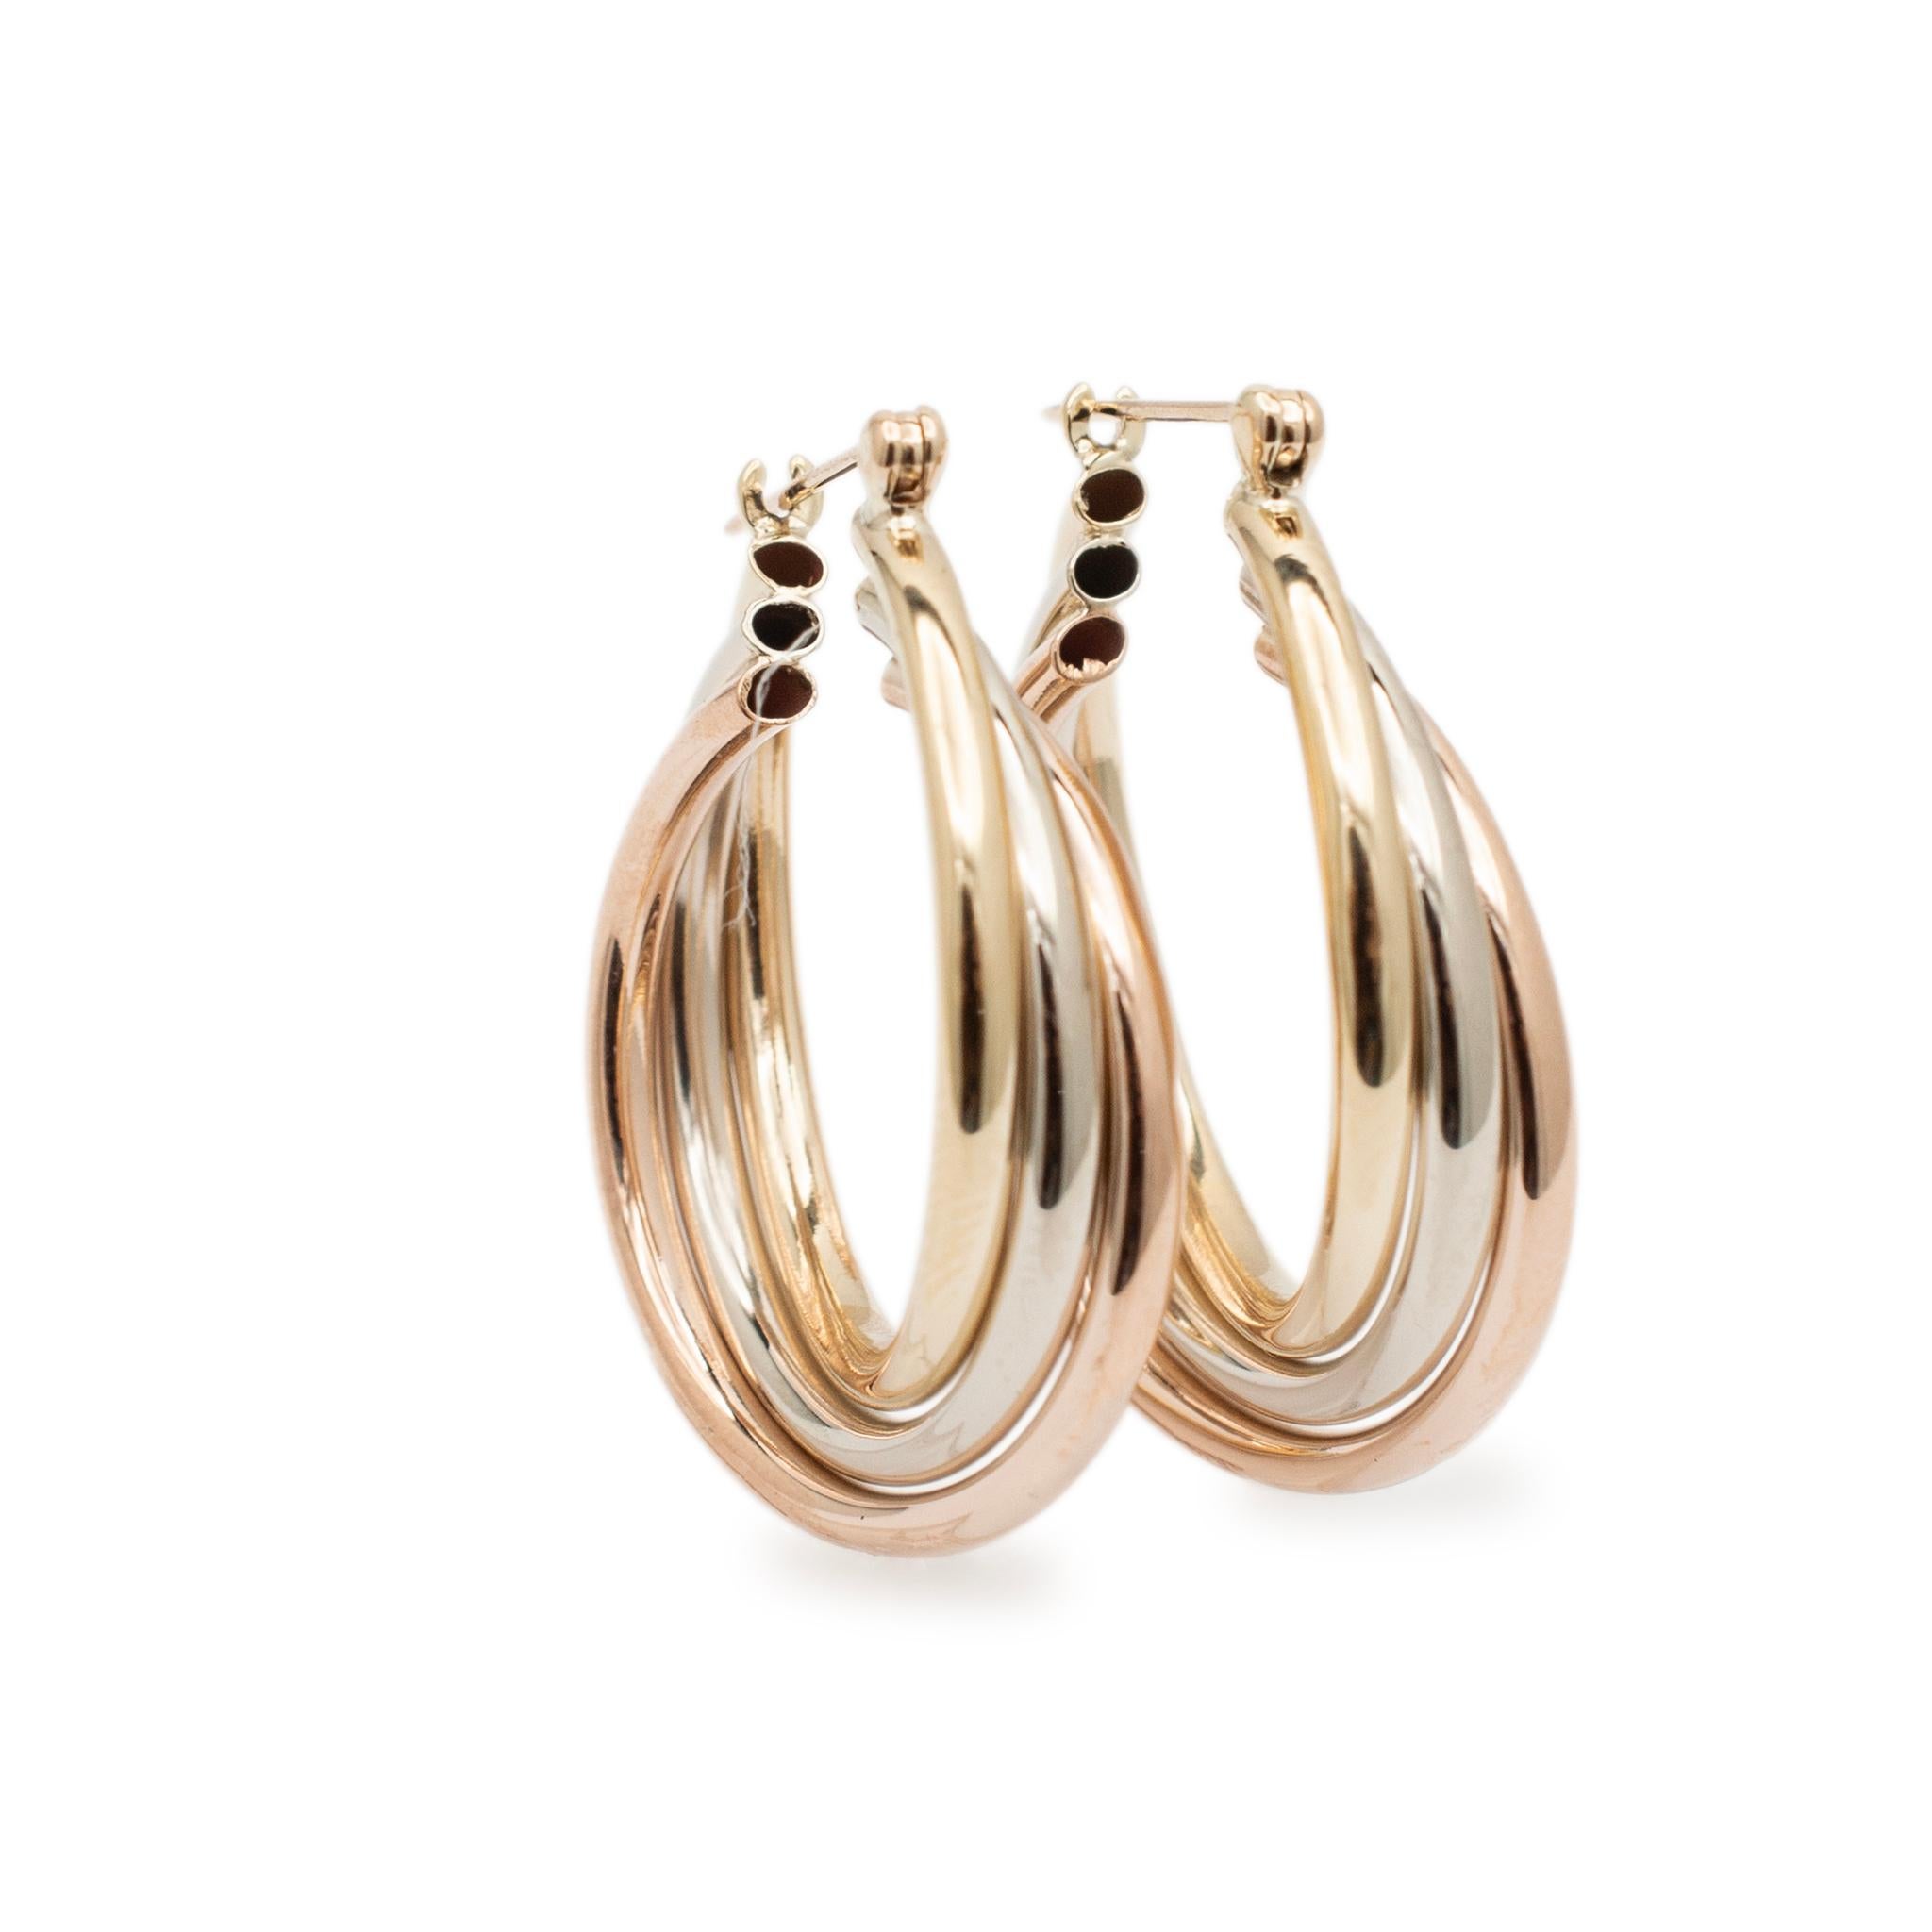 Gender: Ladies

Metal Type: 14K Rose, Yellow and White Gold

Length: 1.00 inches

Shank Width: 25.00 mm

Weight: 4.40 grams

Ladies 14K tri-color gold hoop trinity earrings with 